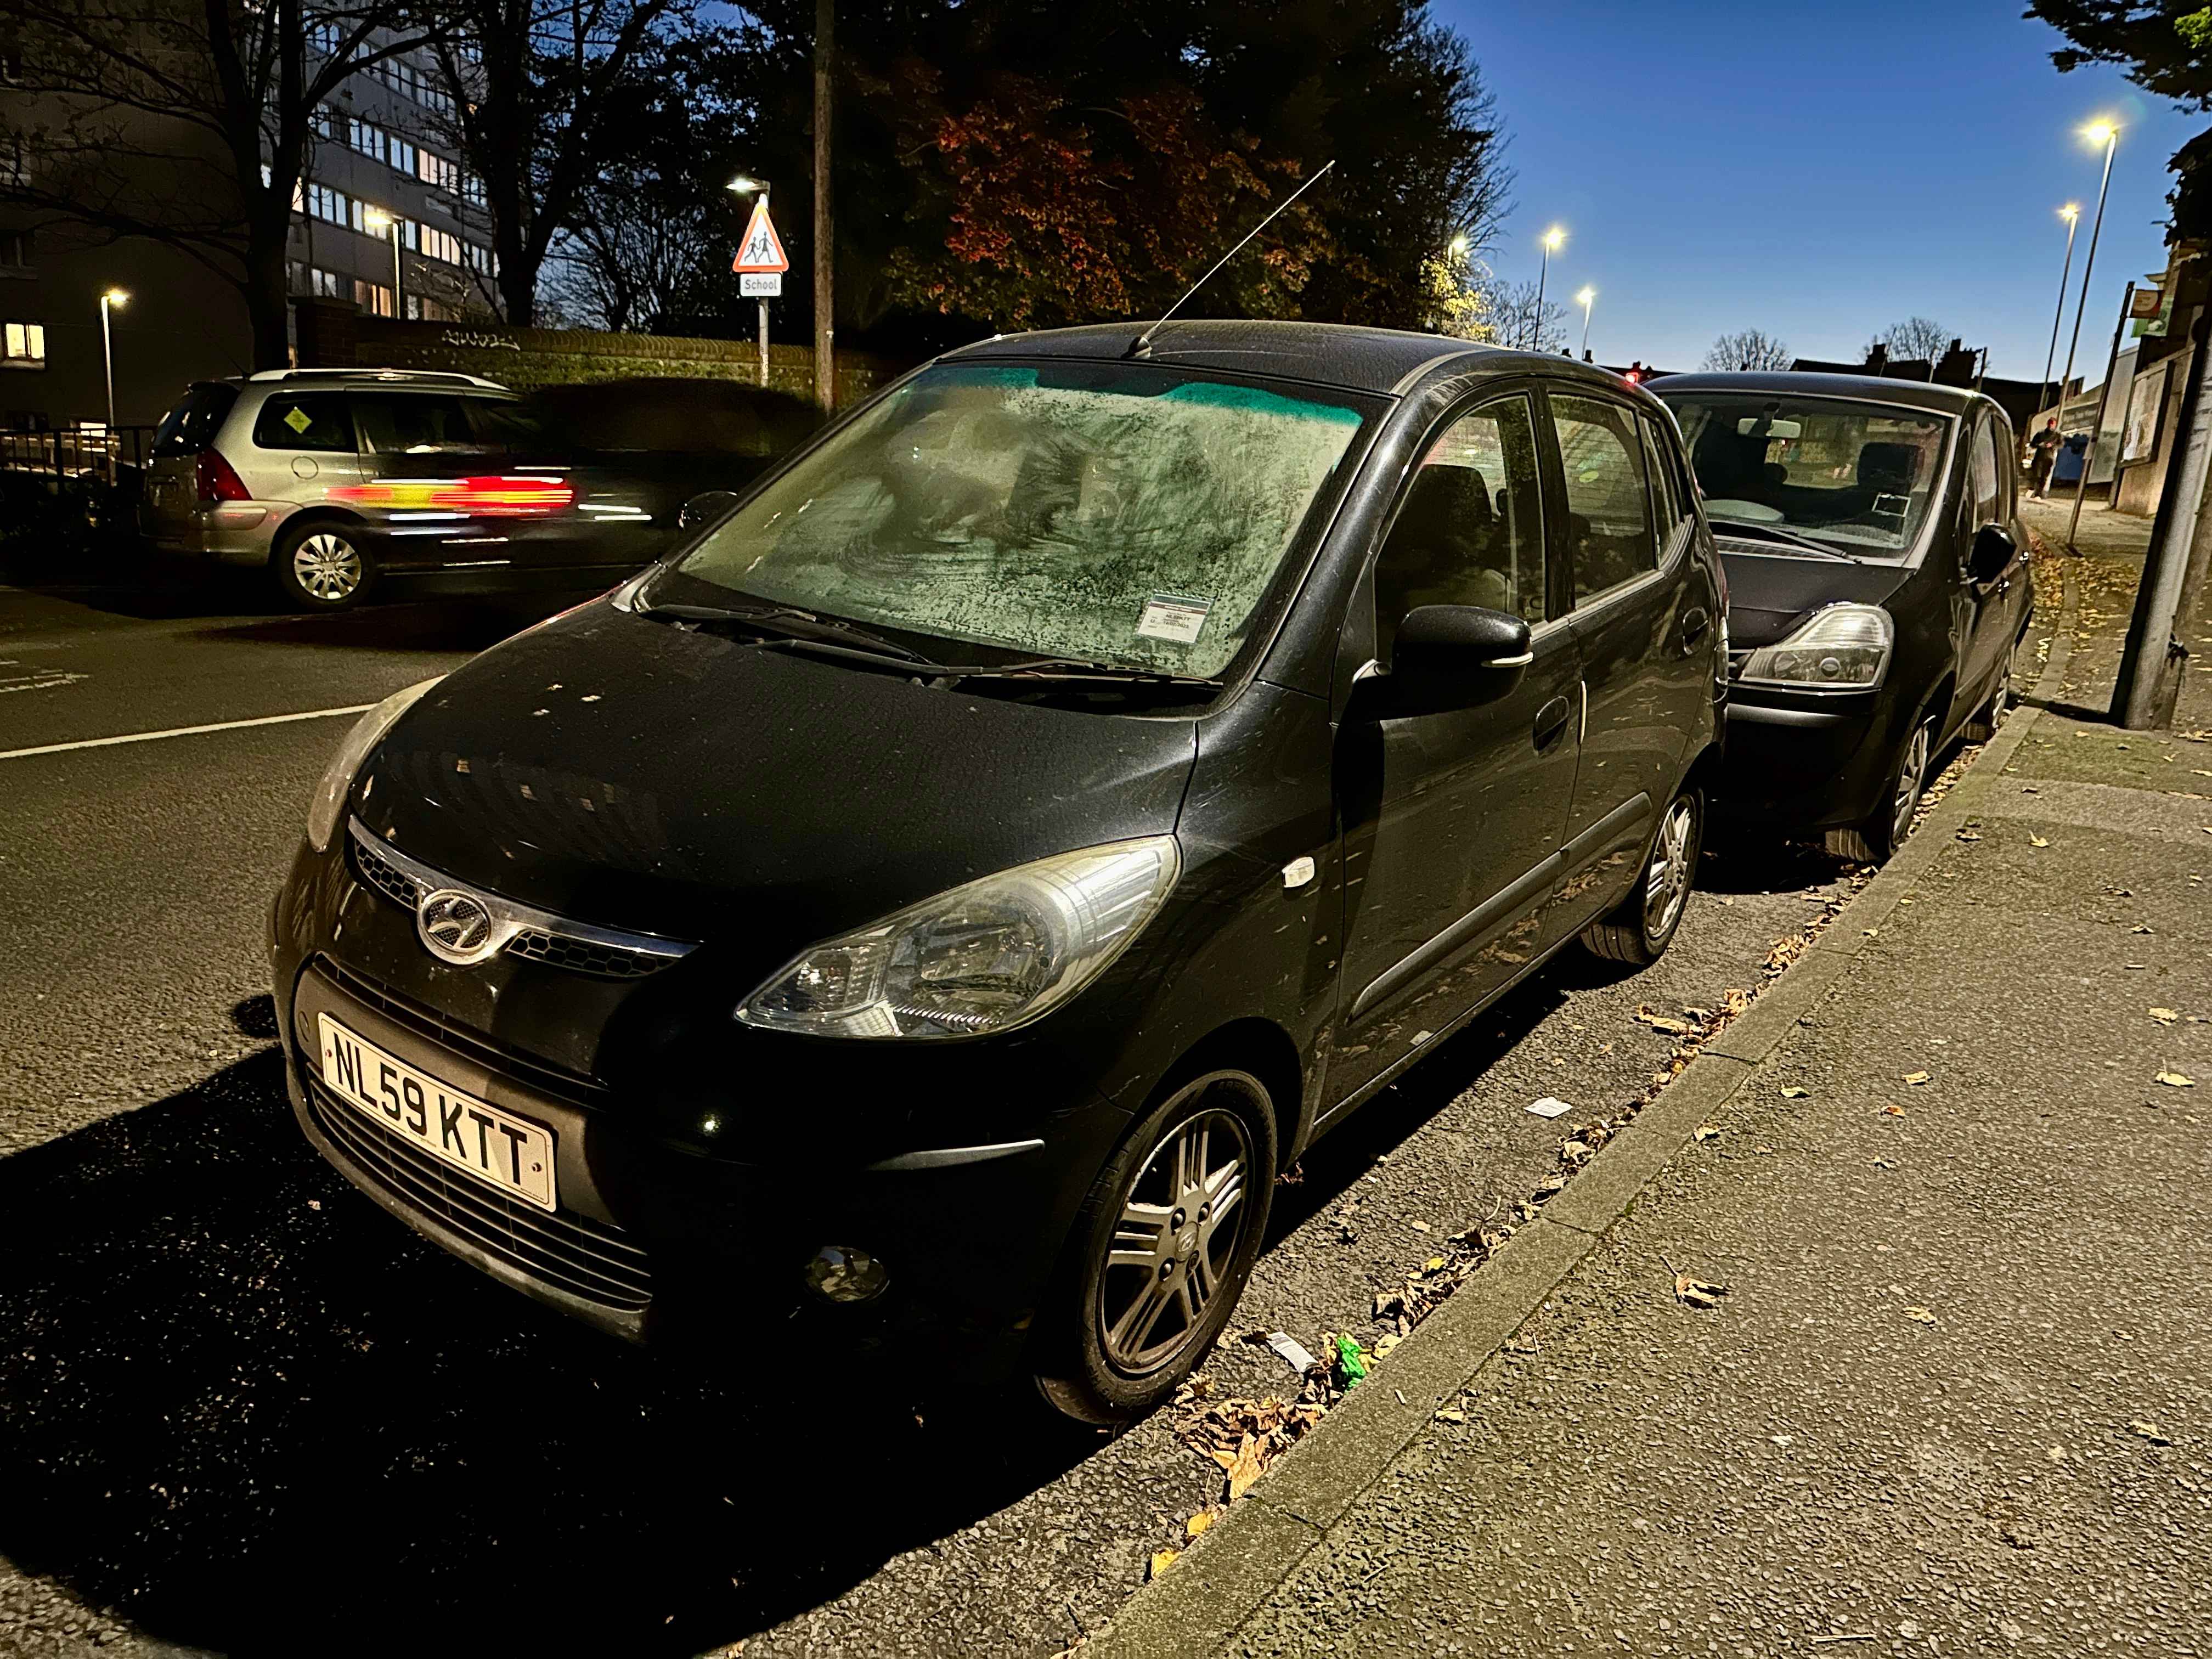 Photograph of NL59 KTT - a Black Hyundai i10 parked in Hollingdean by a non-resident. The second of three photographs supplied by the residents of Hollingdean.